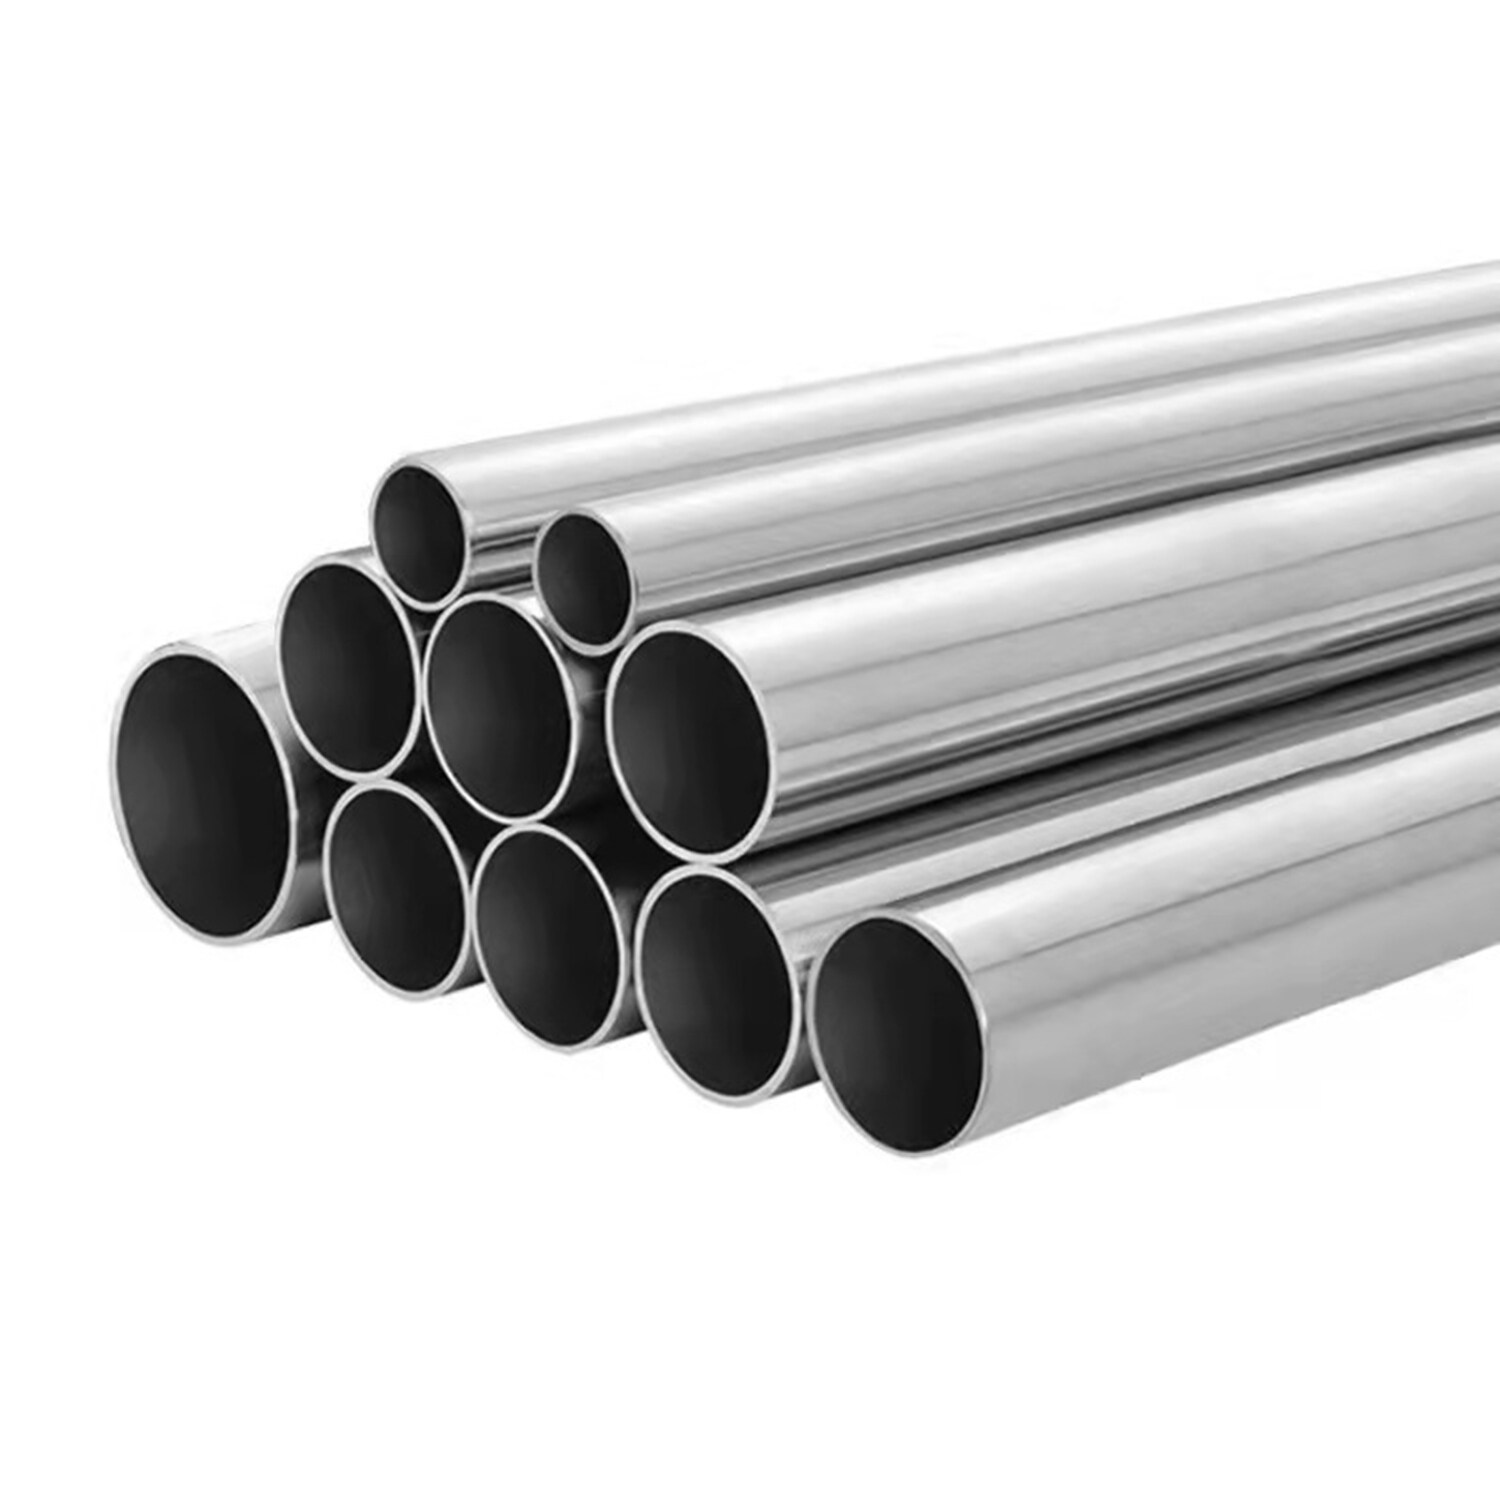 Seamless Steel Tube Manufacturing Process